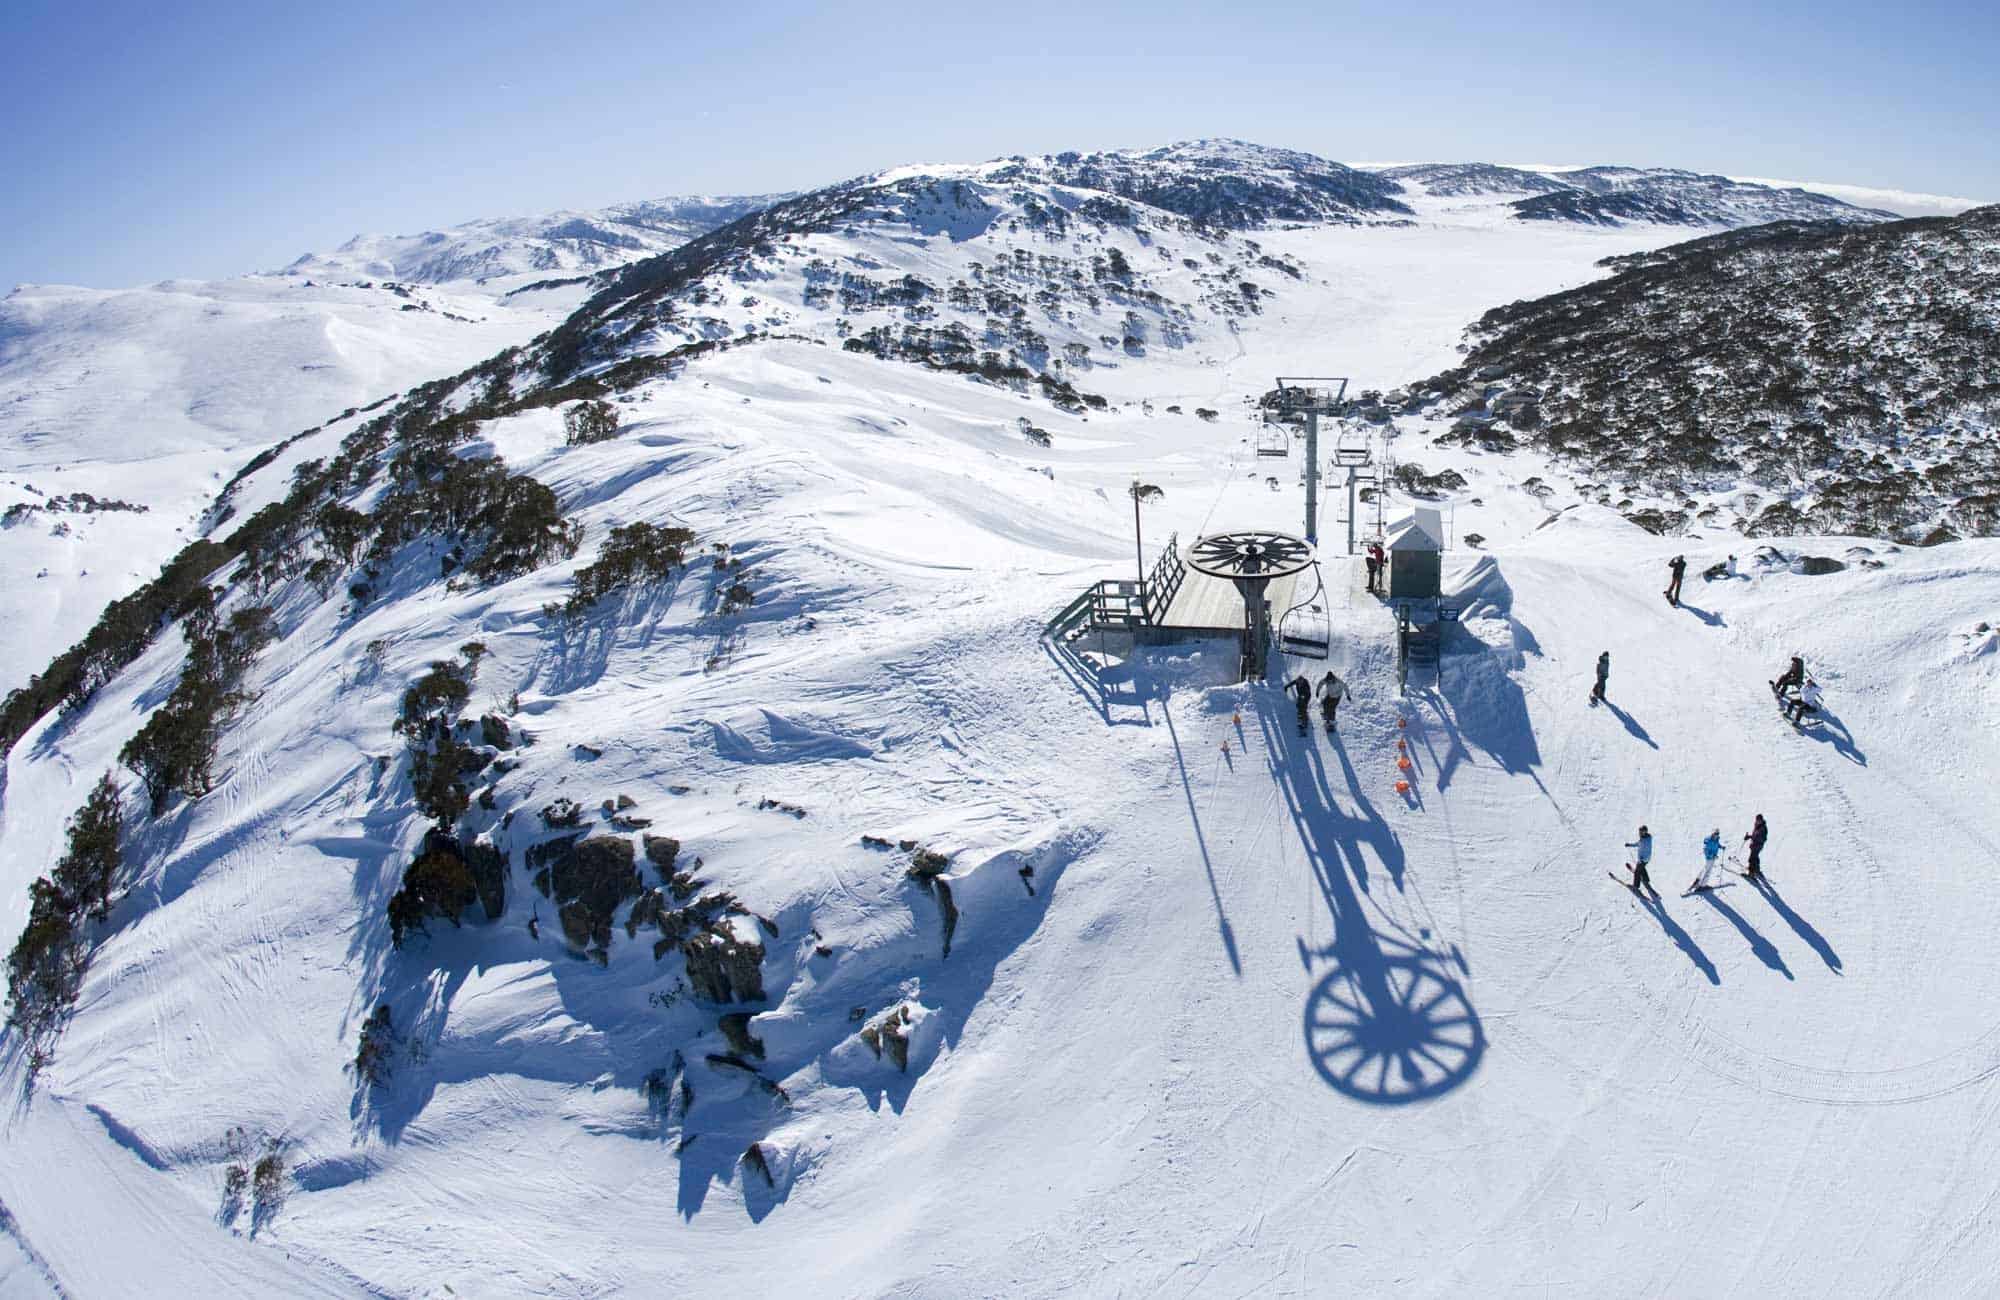 People skiing on mountain cover with snow in australia